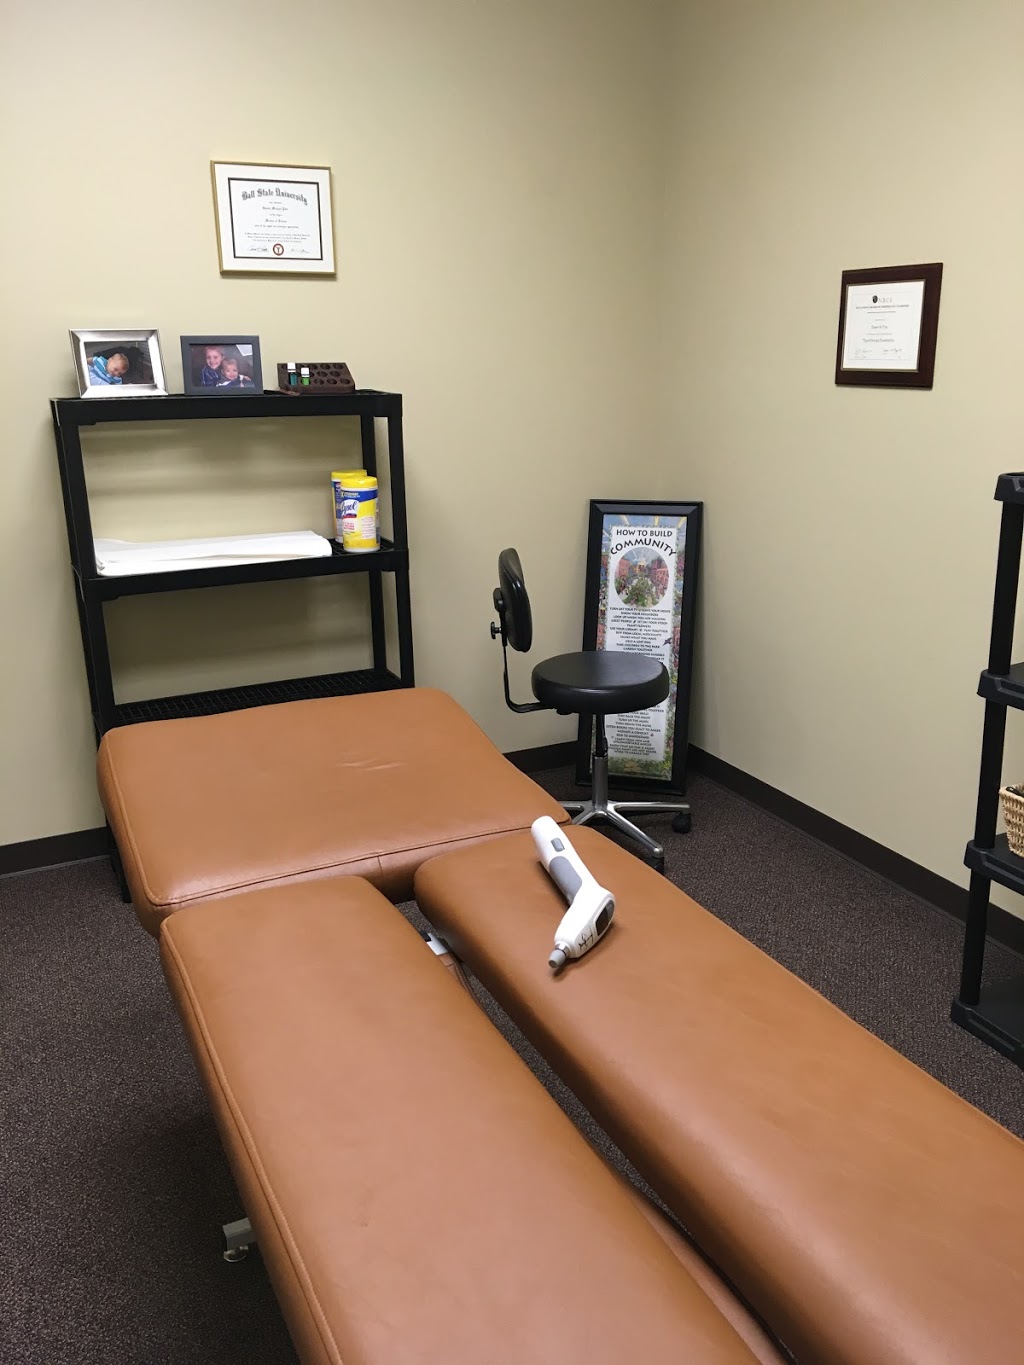 Pala Chiropractic | 14701 Cumberland Rd #350, Noblesville, IN 46060, USA | Phone: (317) 770-1970